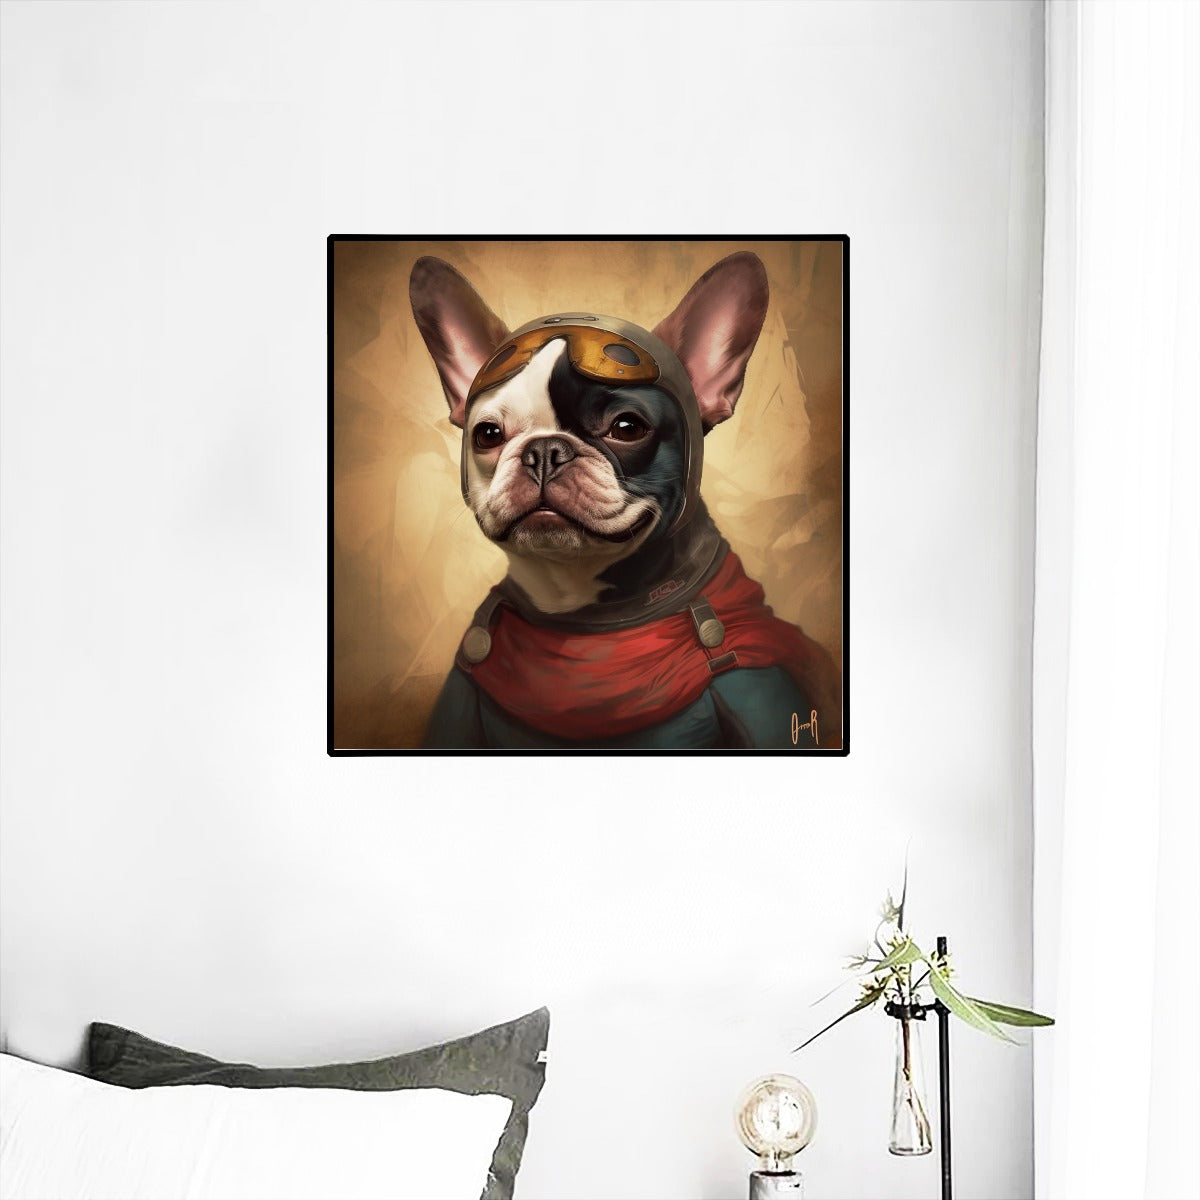 Enchanting Frenchie-Themed Wall Mural